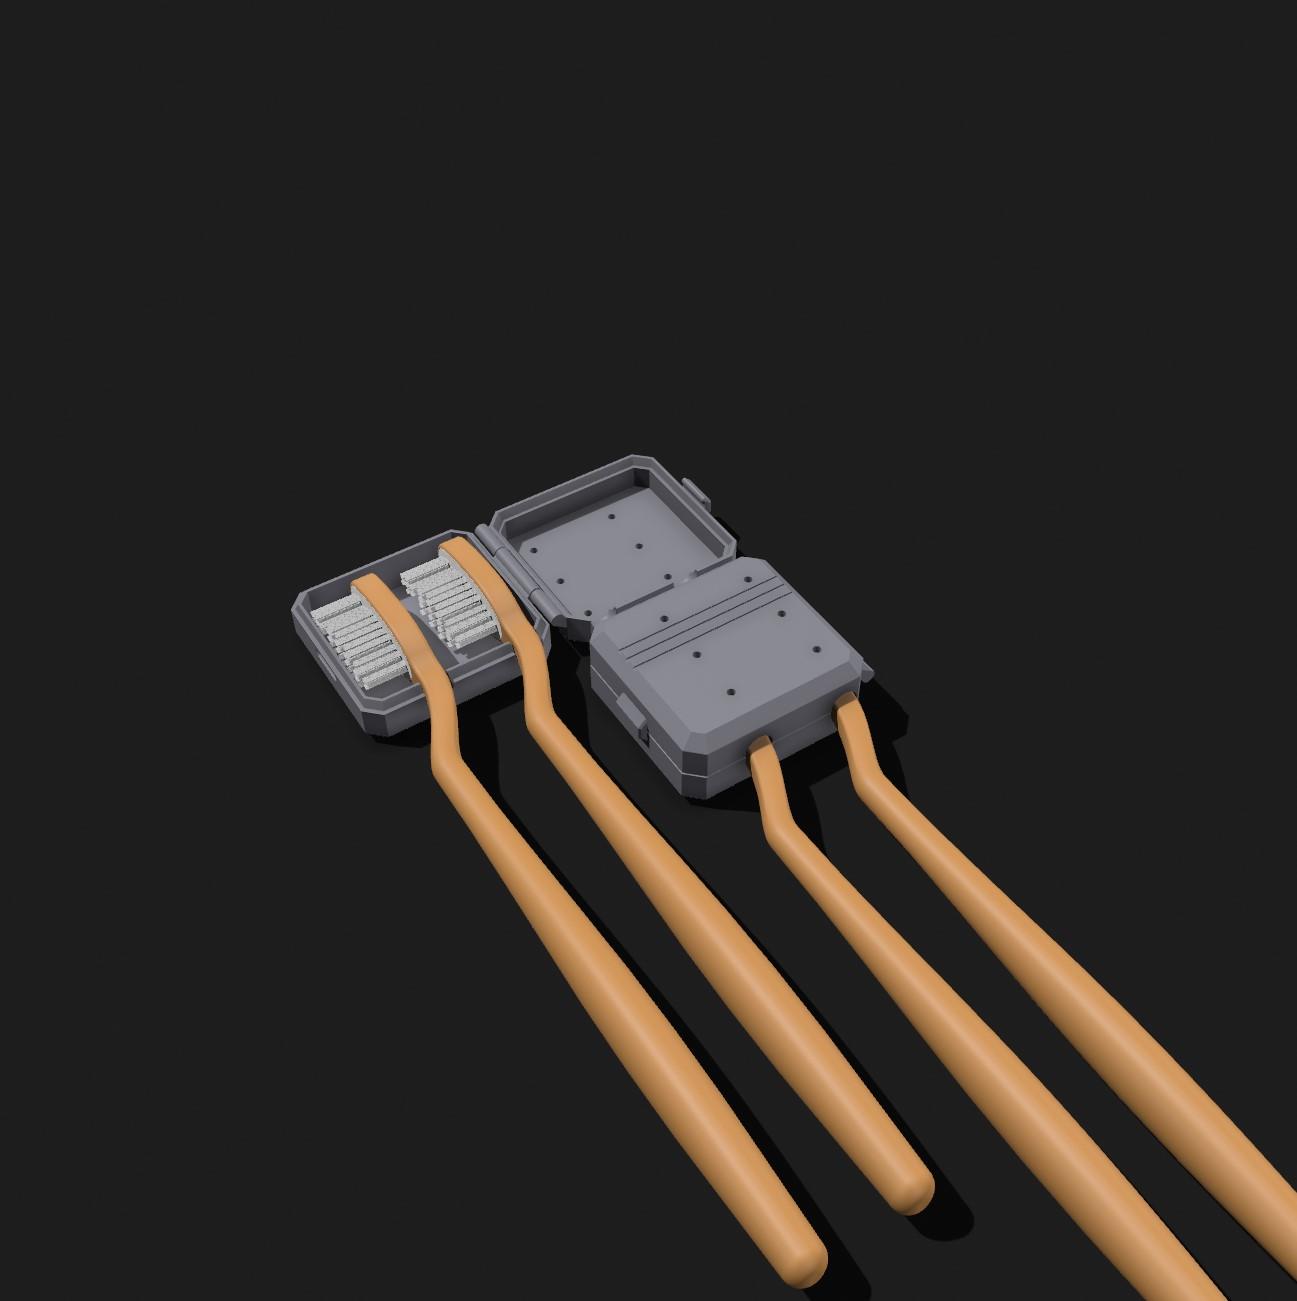 Double toothbrush case 3d model